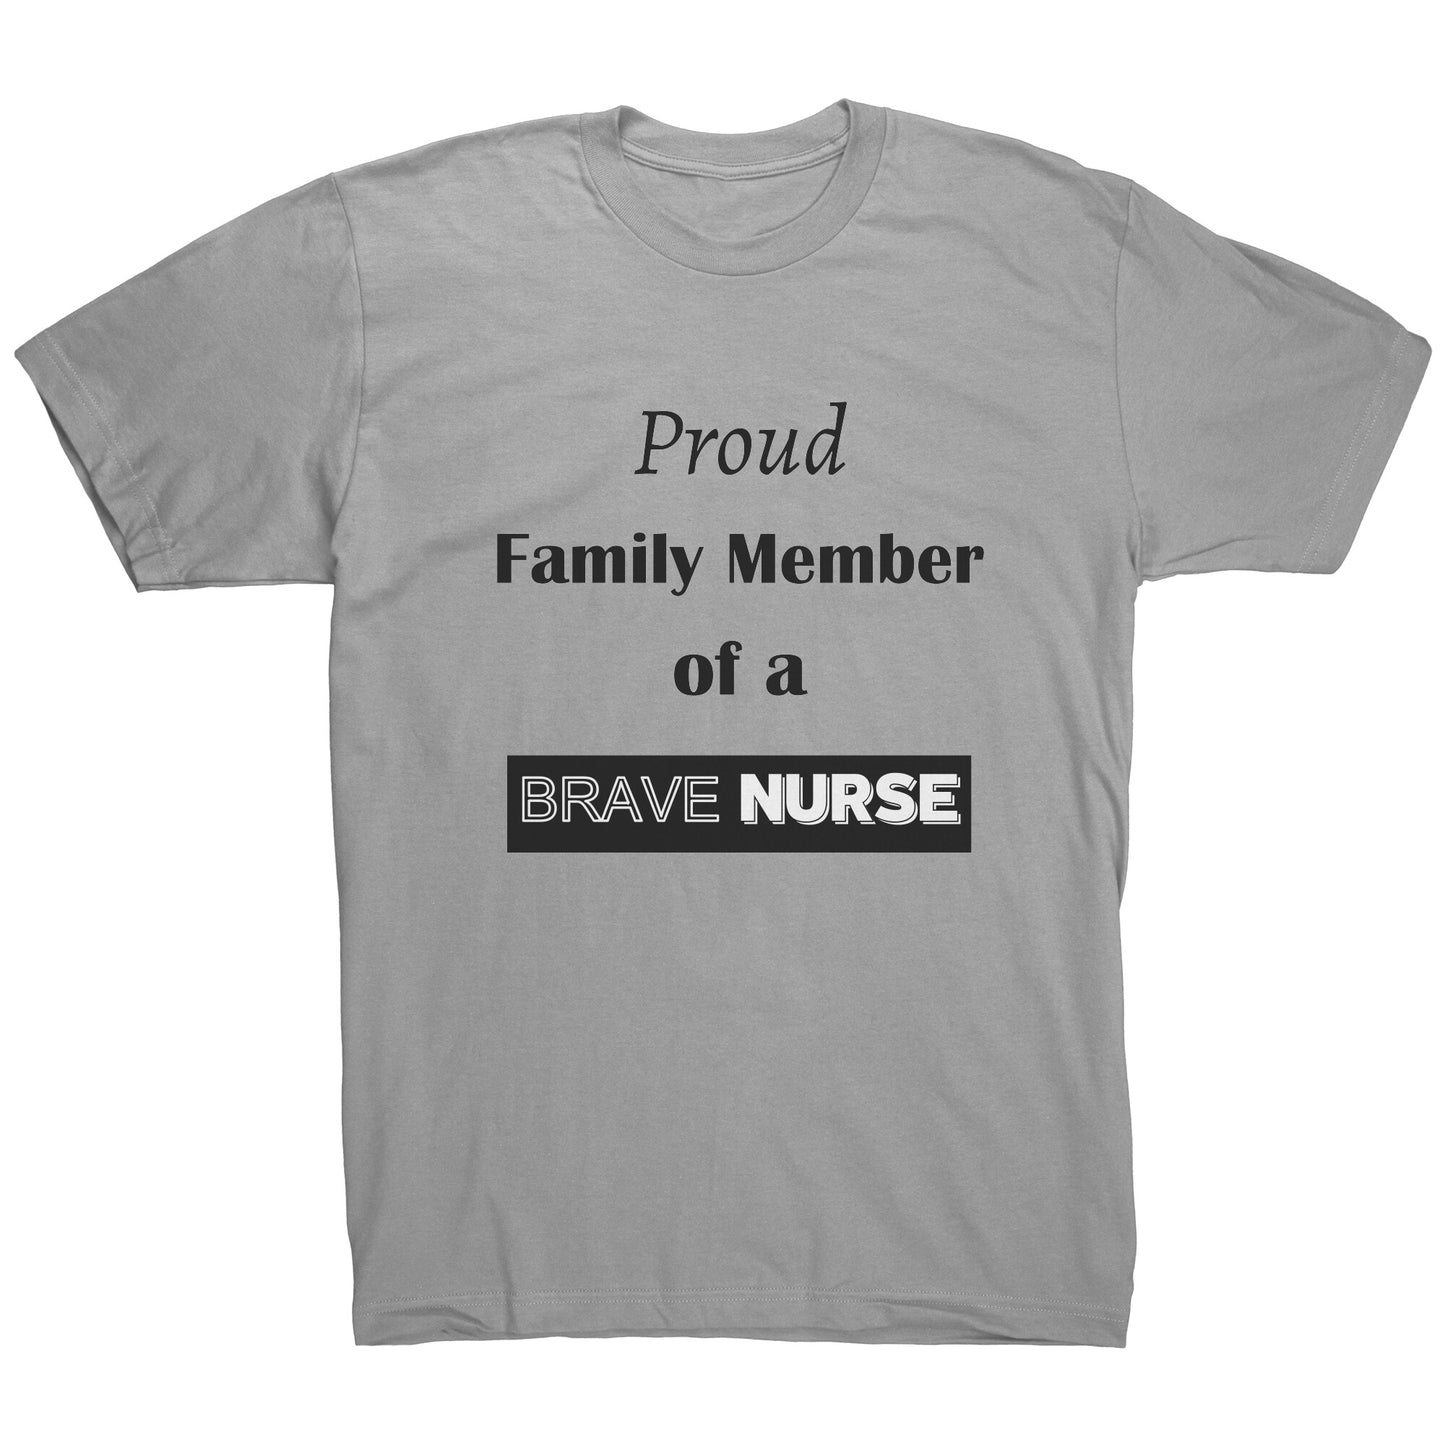 Proud Family Member of a Brave Nurse Lettering Mens Shirt - Signs and Seasons Gifts